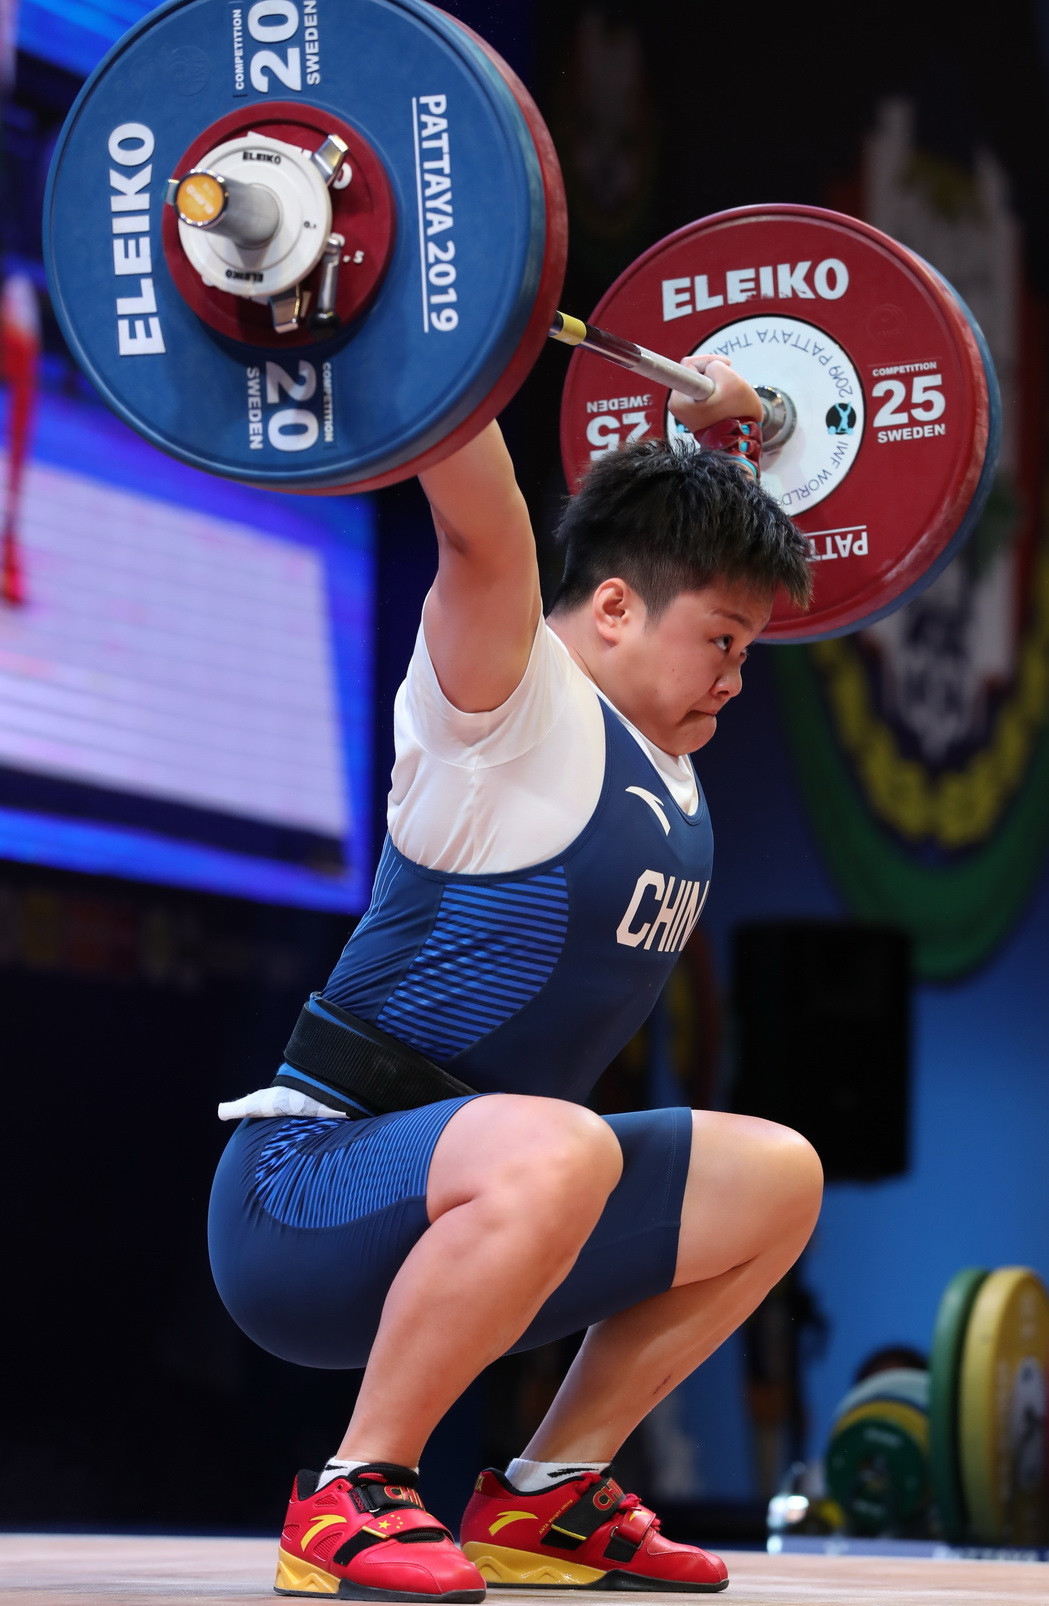 China's Wang Zhouyu claimed a hat-trick of gold medals in the women's 87kg event ©IWF